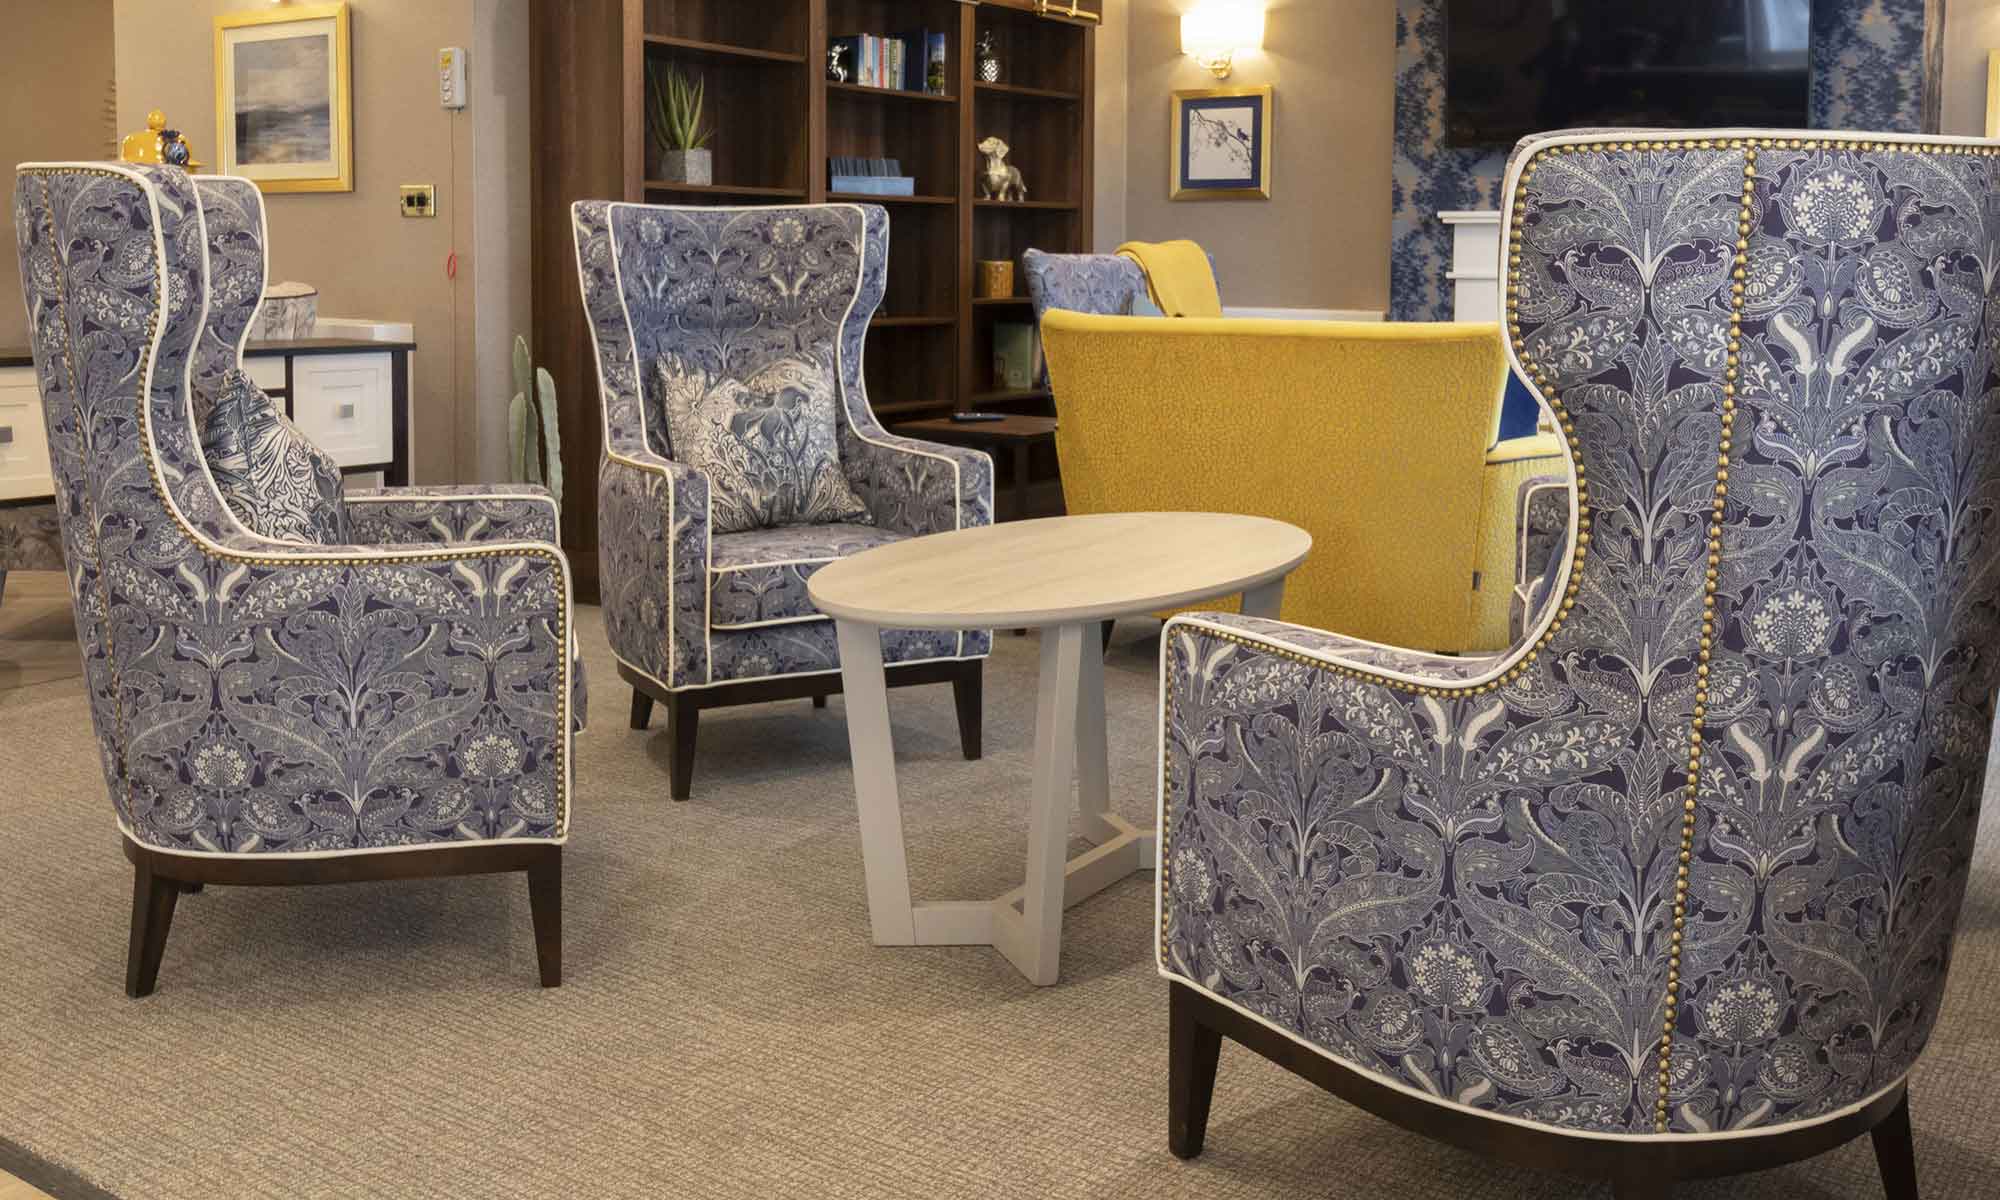 The lounge at St Mary's Care Home with a close up of the Valls wing back chair with gold studding upholstered in a damask heritage pattern fabric.